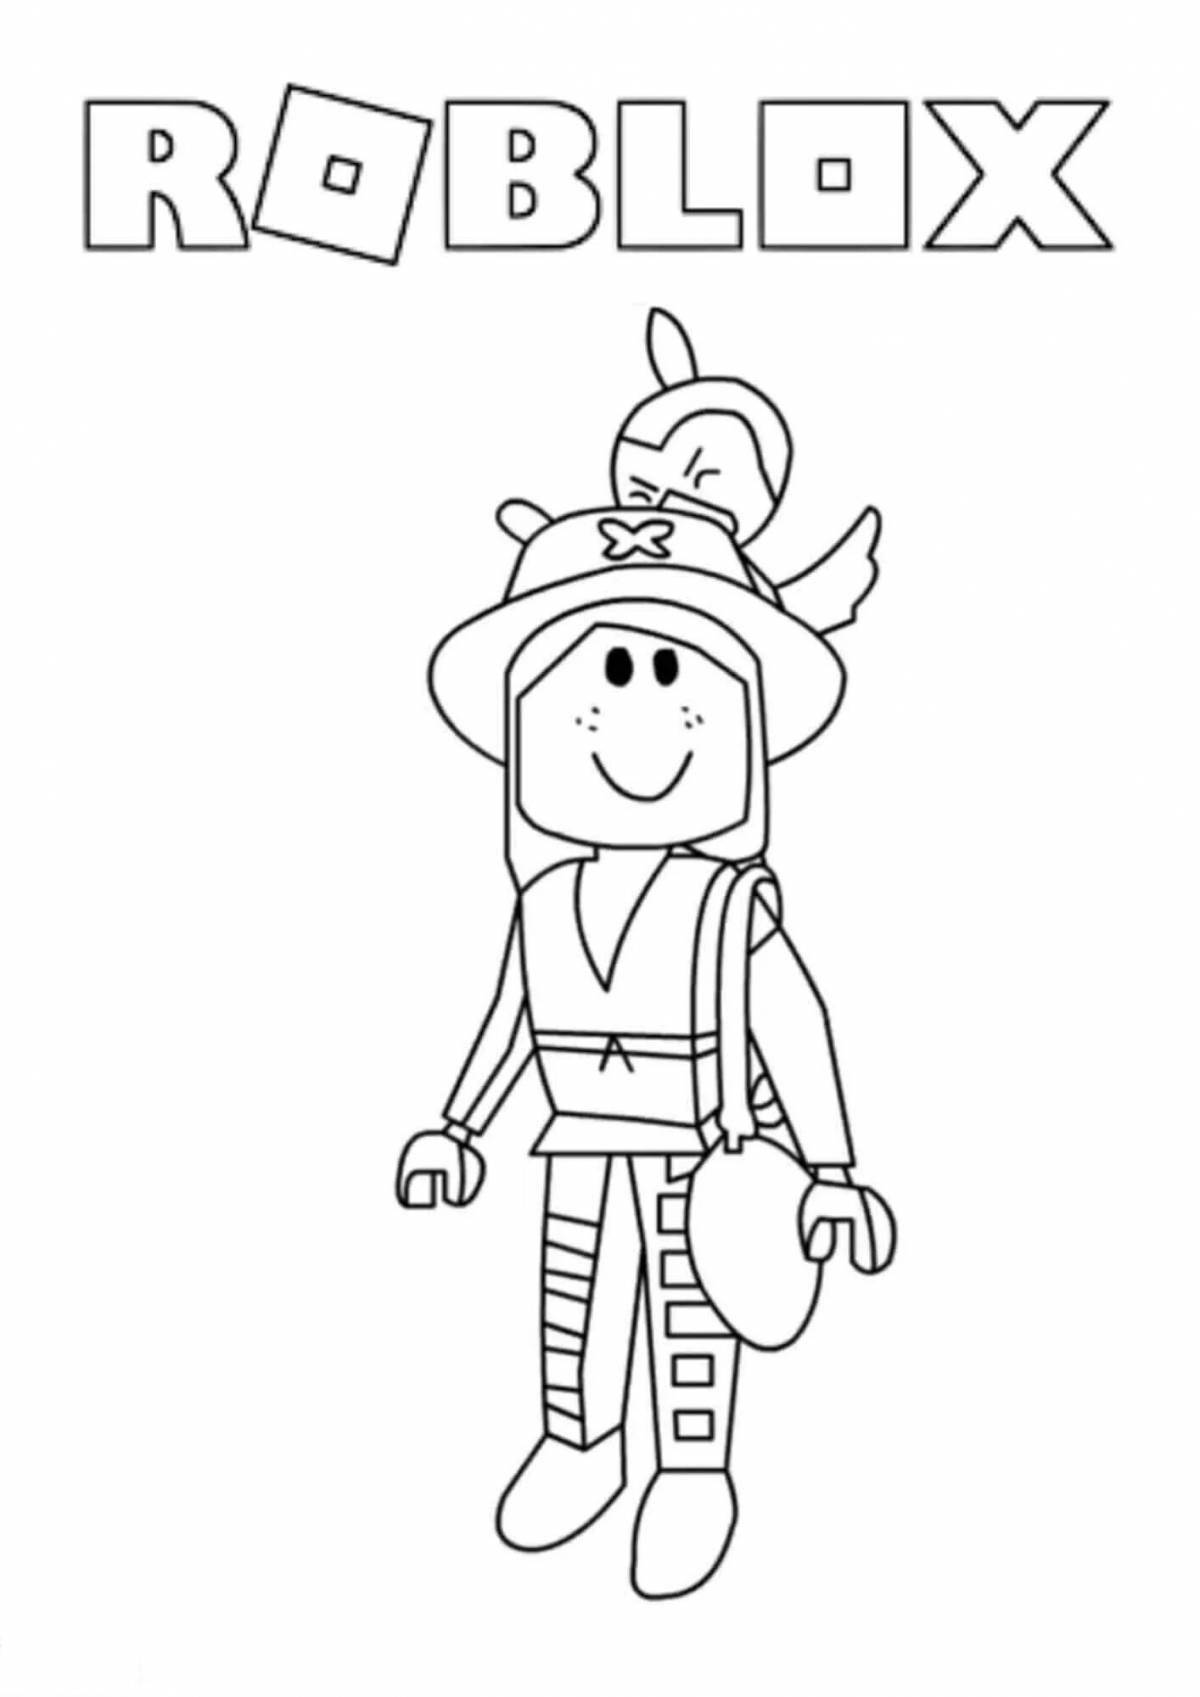 Playful roblox art coloring page